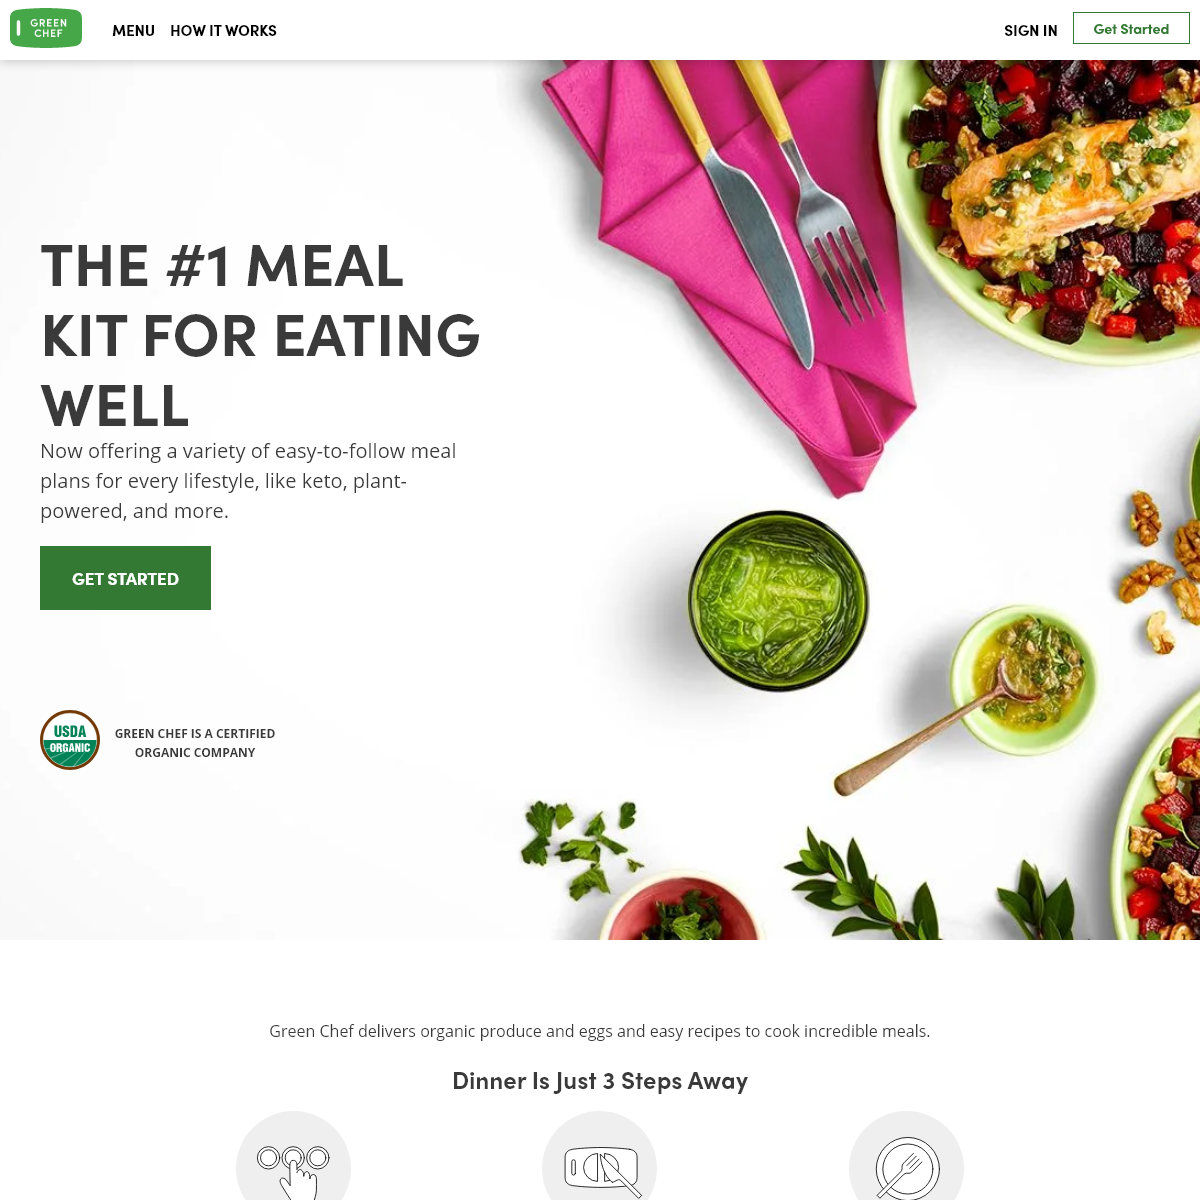 A complete backup of greenchef.com